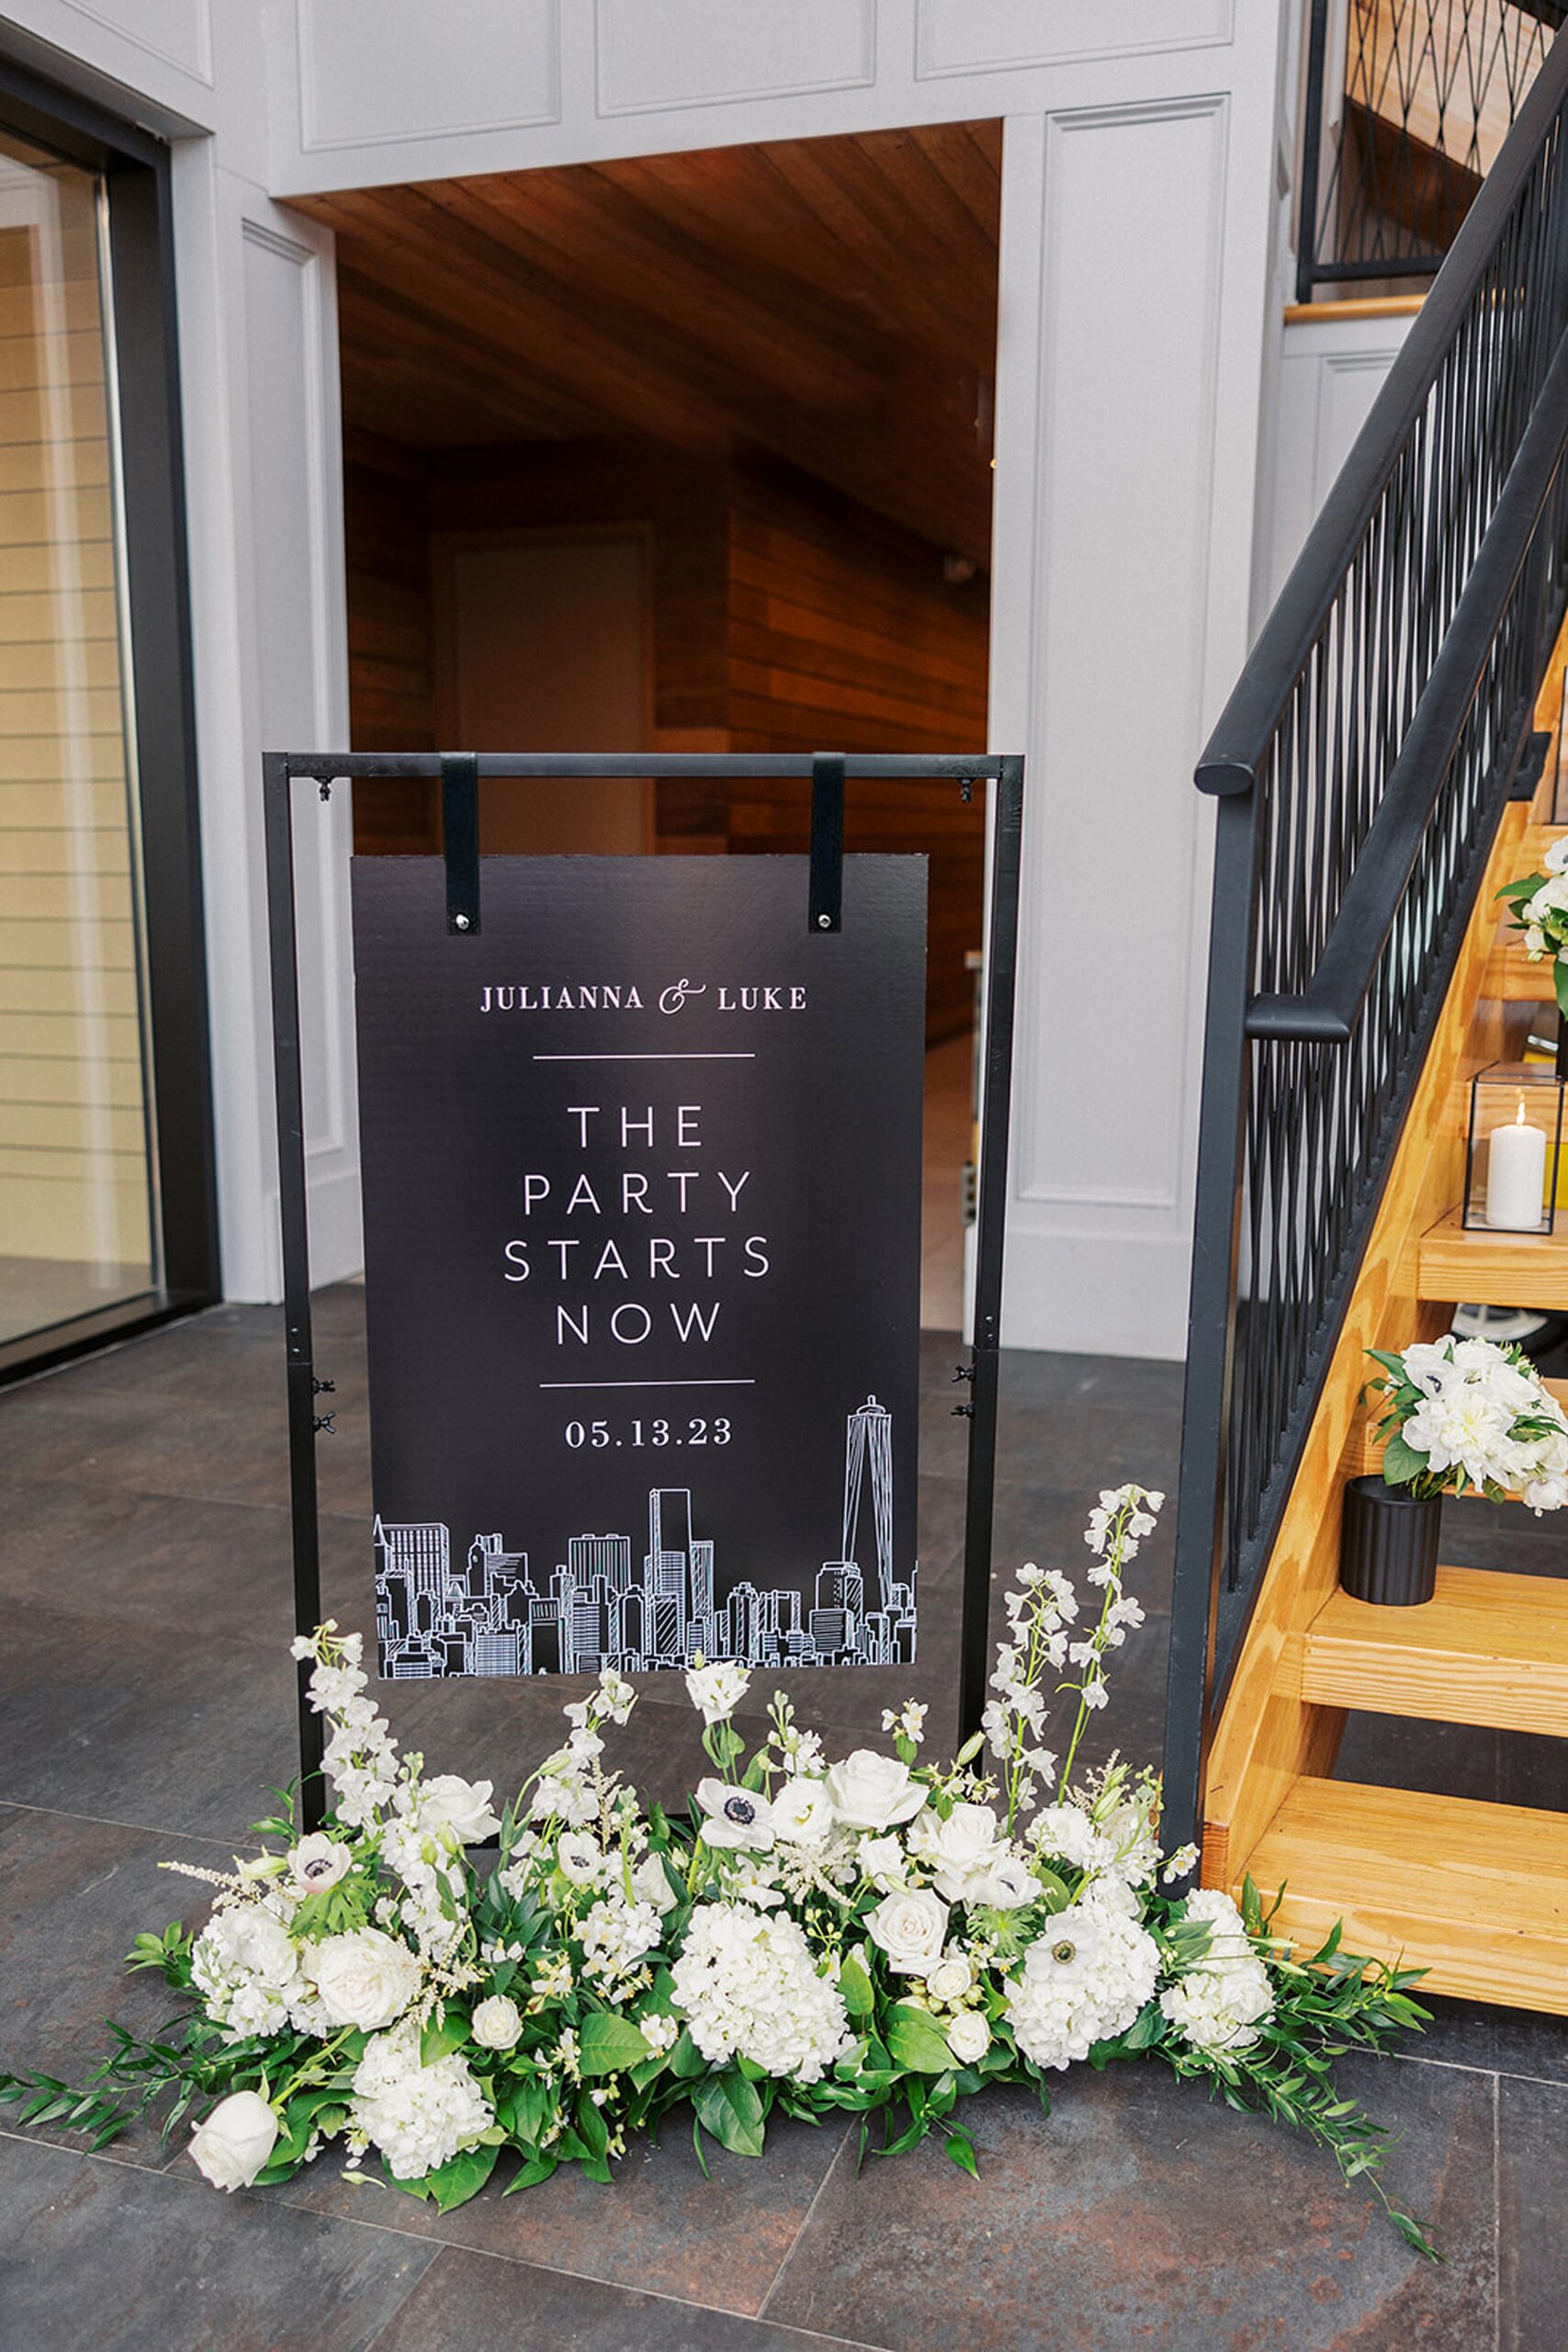 Details of a wedding reception entrance decorated with a sign and white flowers